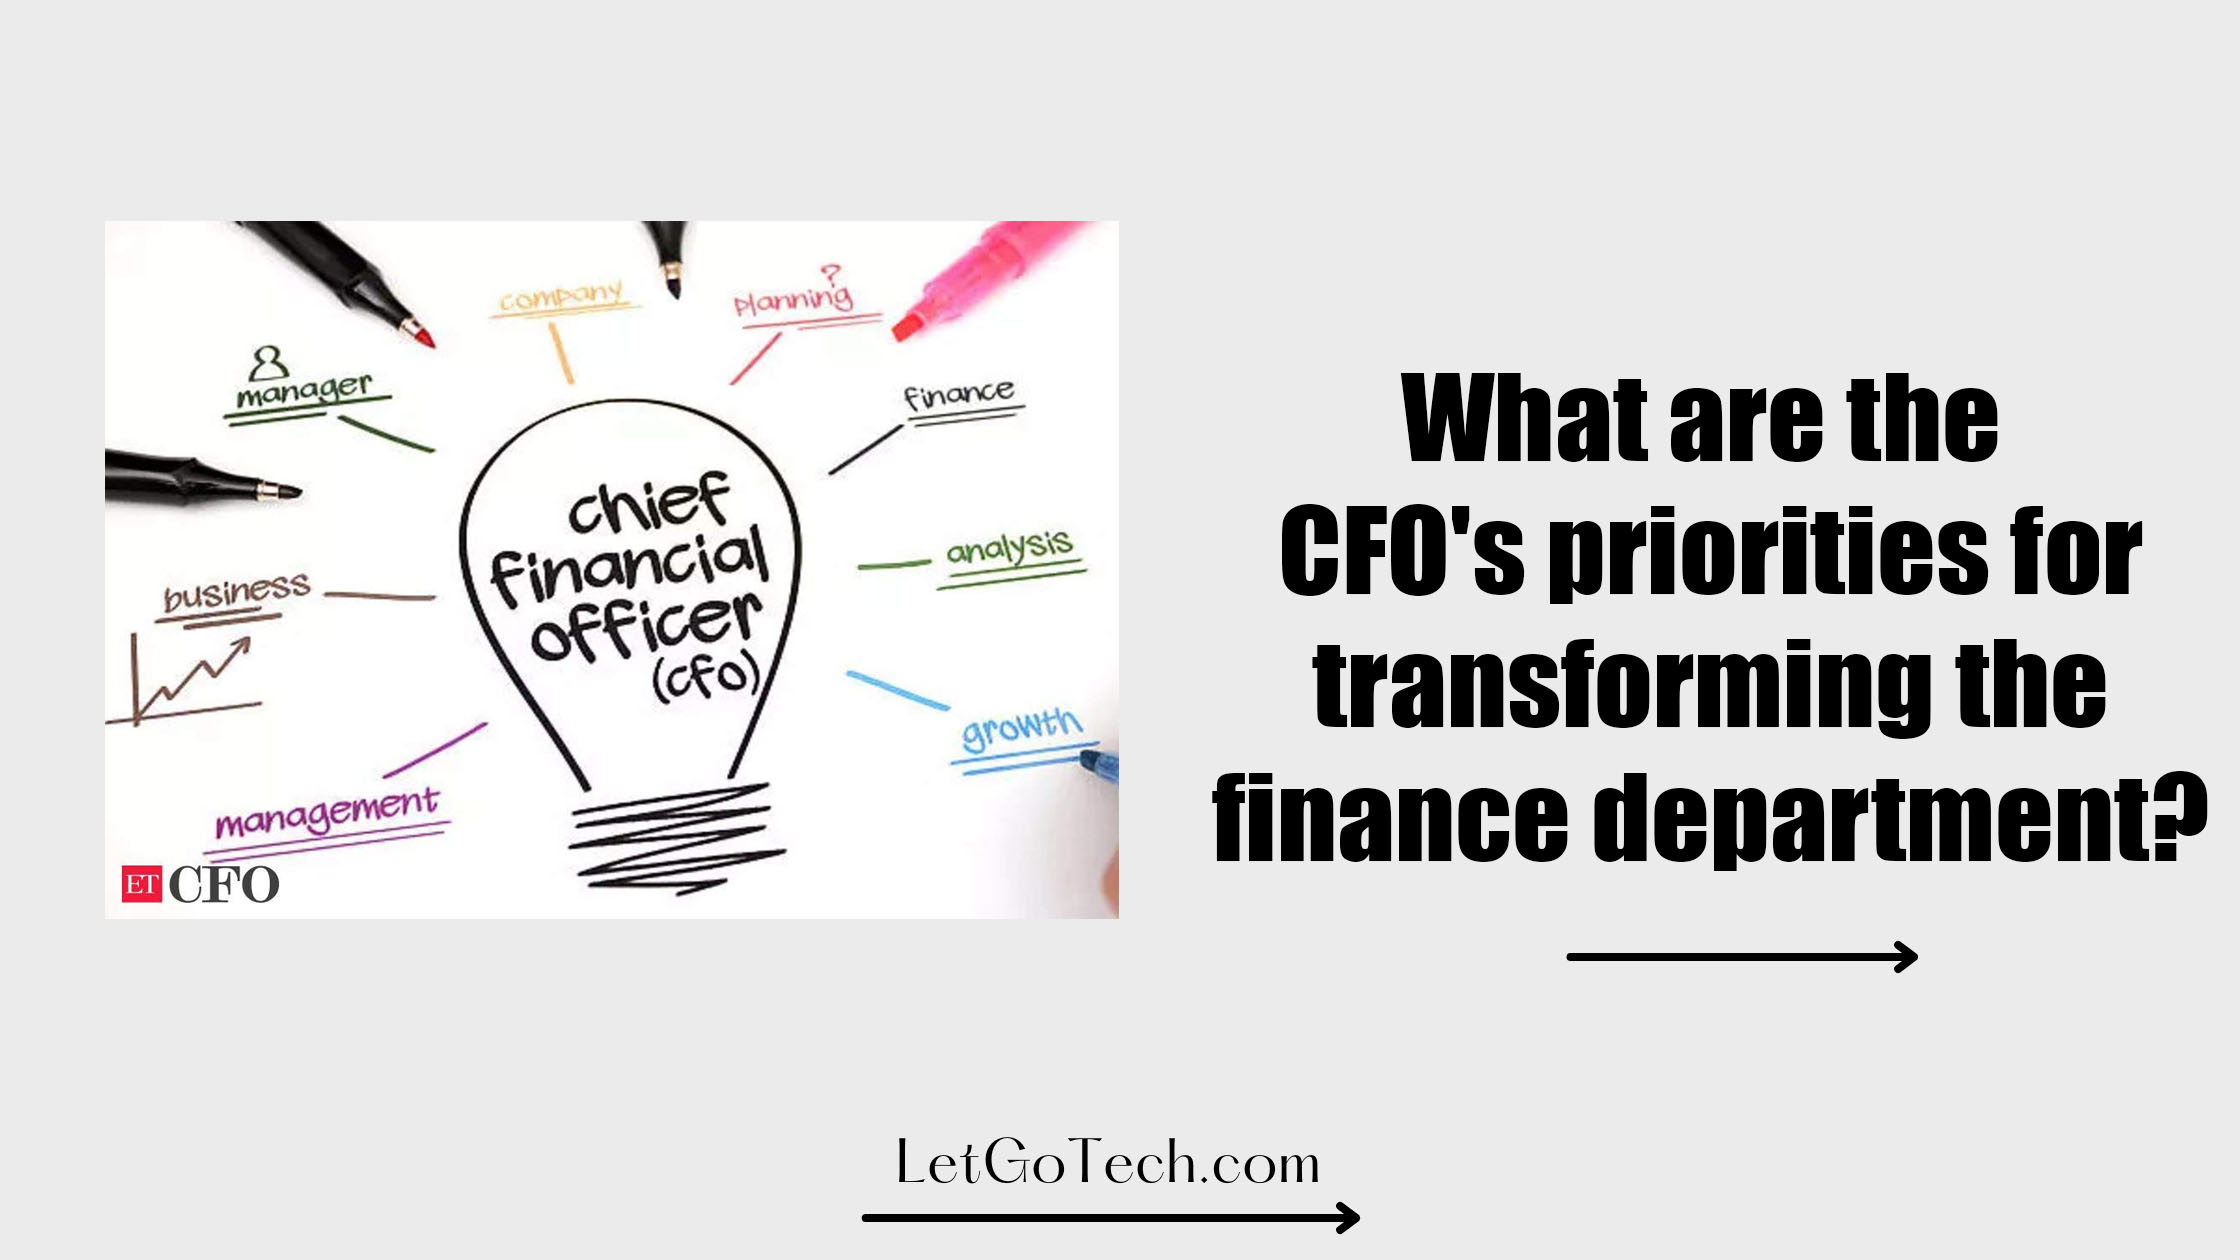 What are the CFO's priorities for transforming the finance department